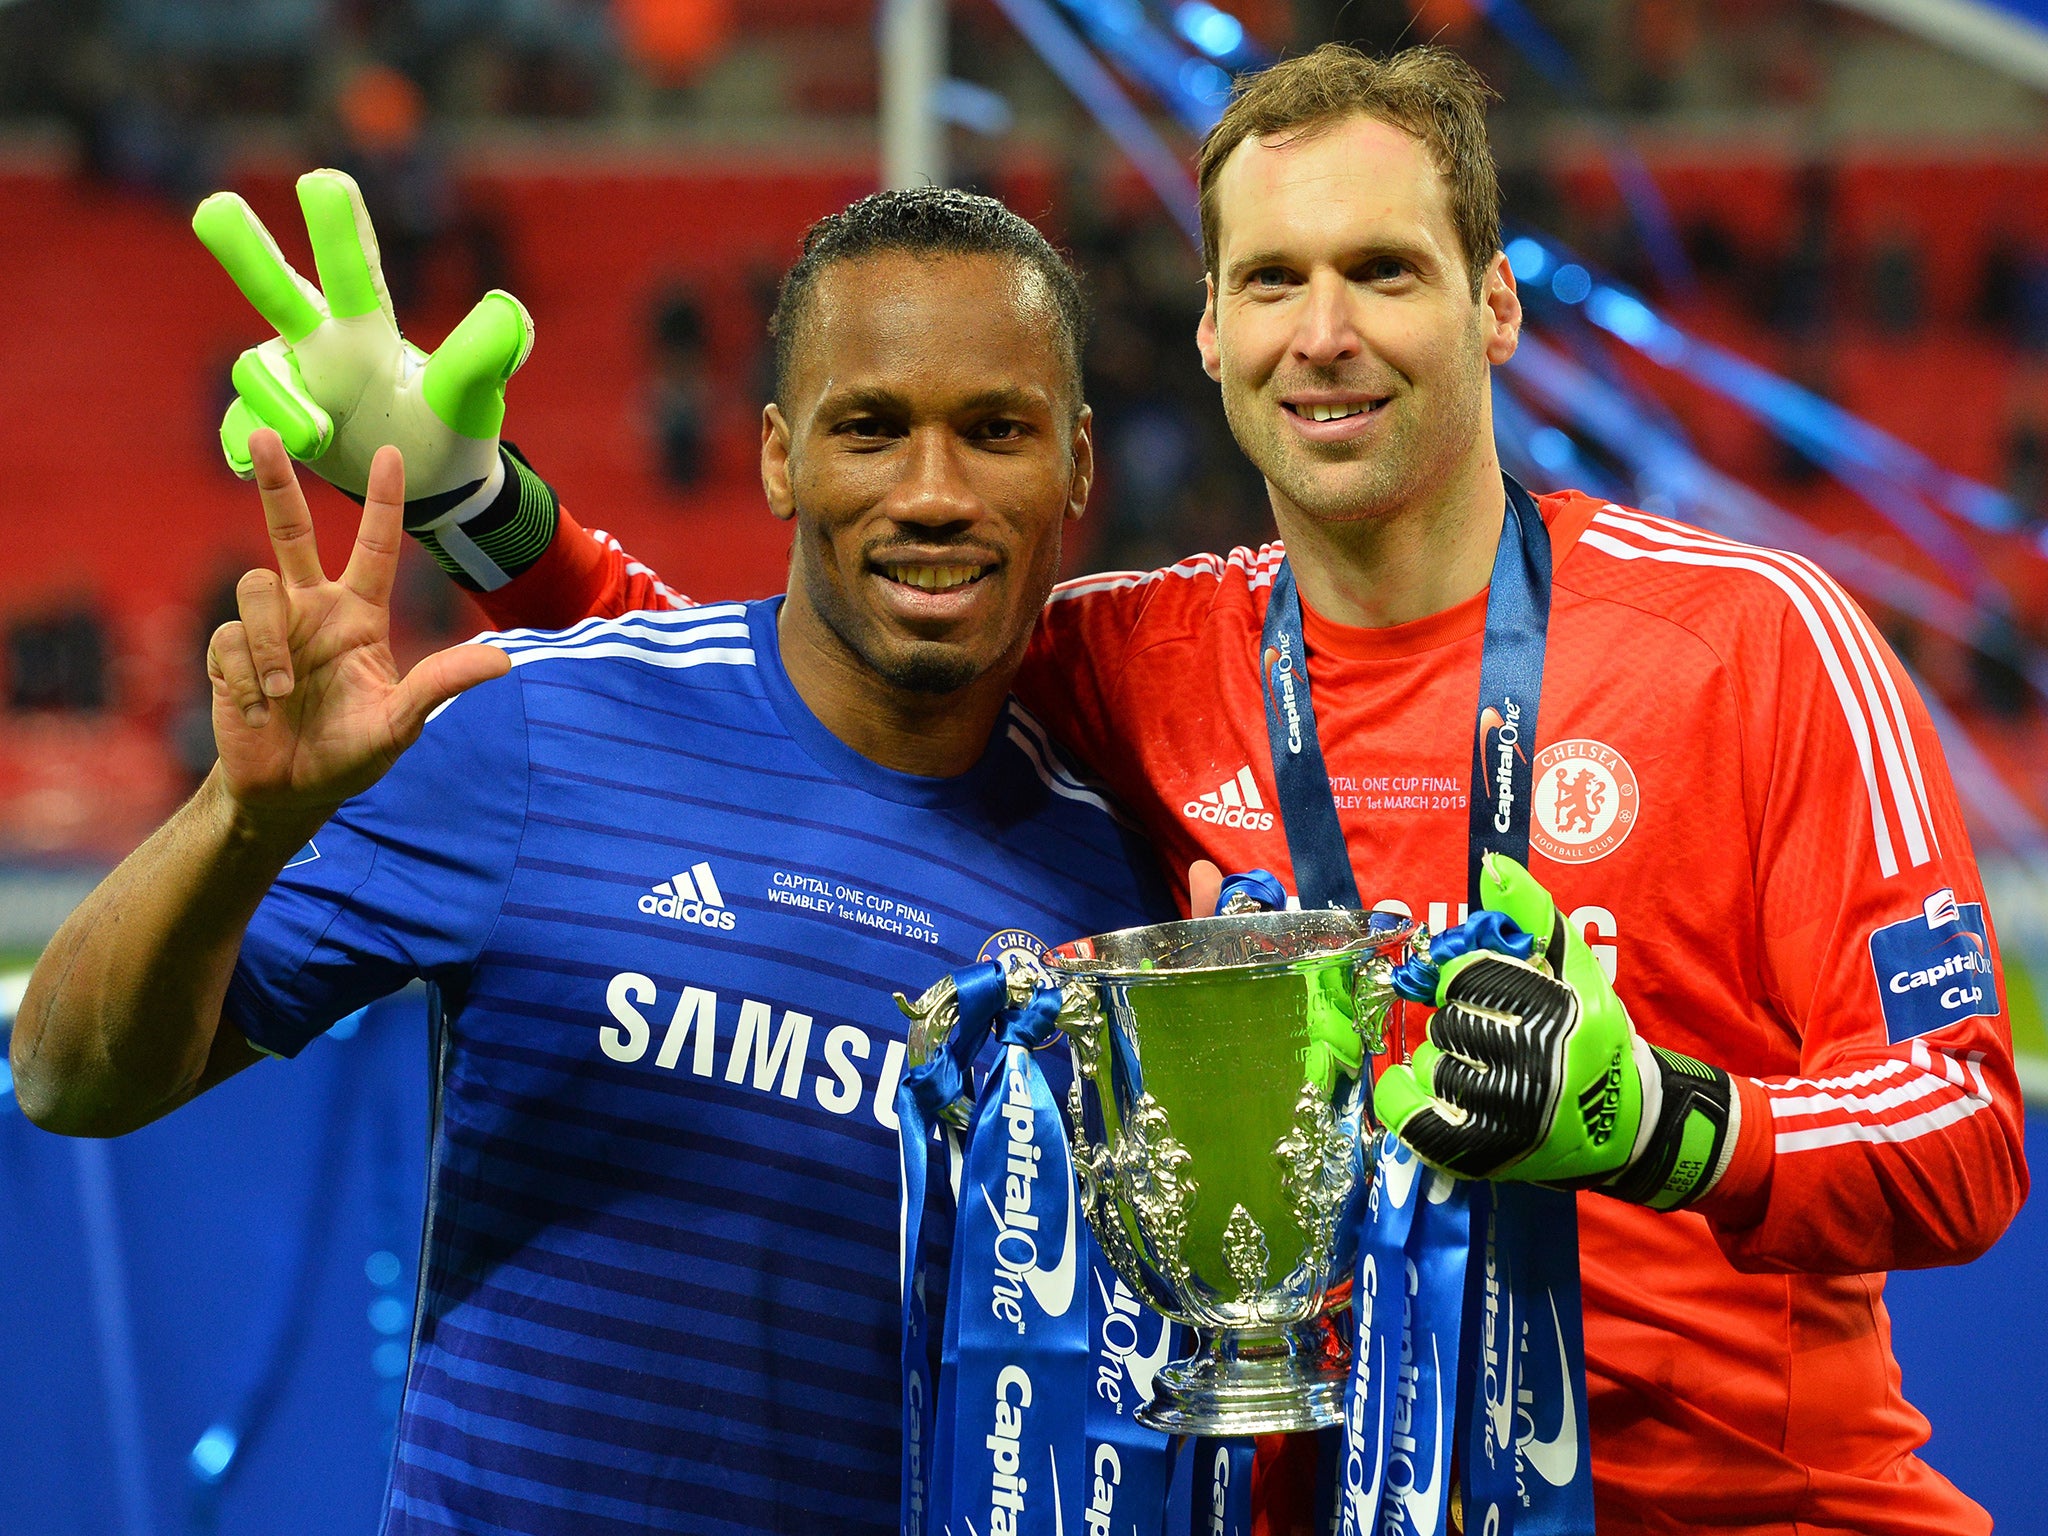 Cech, who won the 12th honour of his career, is likely to leave in the summer